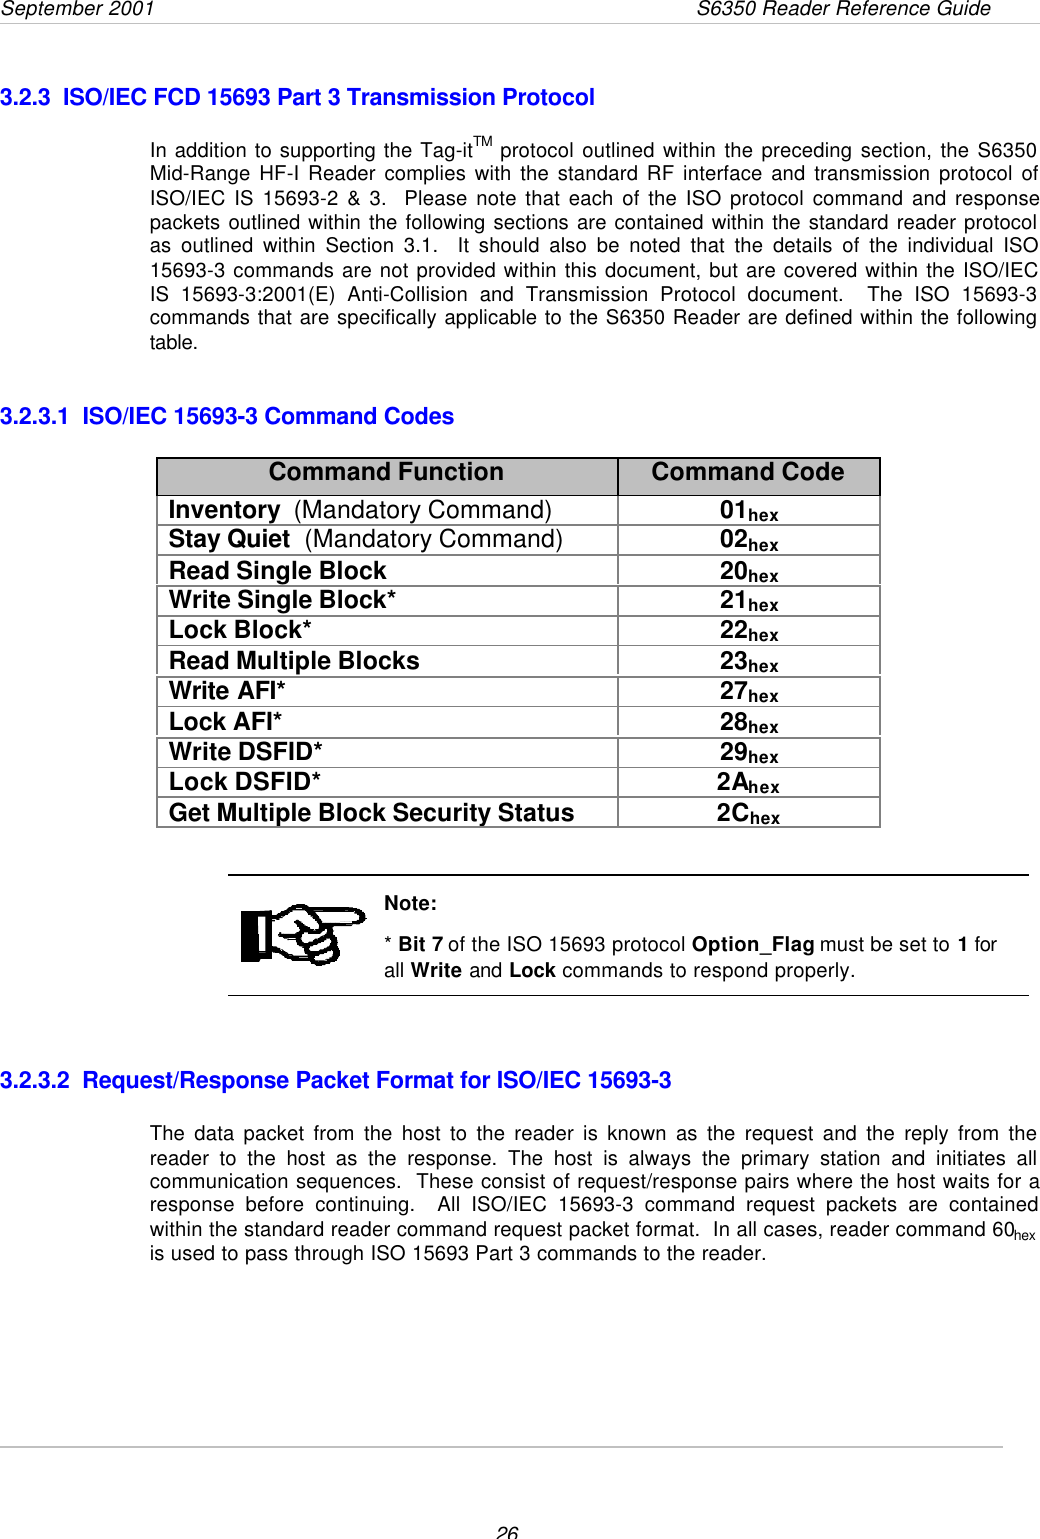 September 2001                 S6350 Reader Reference Guide263.2.3  ISO/IEC FCD 15693 Part 3 Transmission ProtocolIn addition to supporting the Tag-itTM protocol outlined within the preceding section, the S6350Mid-Range HF-I Reader complies with the standard RF interface and transmission protocol ofISO/IEC IS 15693-2 &amp; 3.  Please note that each of the ISO protocol command and responsepackets outlined within the following sections are contained within the standard reader protocolas outlined within Section 3.1.  It should also be noted that the details of the individual ISO15693-3 commands are not provided within this document, but are covered within the ISO/IECIS 15693-3:2001(E) Anti-Collision and Transmission Protocol document.  The ISO 15693-3commands that are specifically applicable to the S6350 Reader are defined within the followingtable.3.2.3.1  ISO/IEC 15693-3 Command CodesCommand Function Command CodeInventory  (Mandatory Command) 01hexStay Quiet  (Mandatory Command) 02hexRead Single Block 20hexWrite Single Block* 21hexLock Block* 22hexRead Multiple Blocks 23hexWrite AFI* 27hexLock AFI* 28hexWrite DSFID* 29hexLock DSFID* 2AhexGet Multiple Block Security Status 2ChexNote:* Bit 7 of the ISO 15693 protocol Option_Flag must be set to 1 forall Write and Lock commands to respond properly.3.2.3.2  Request/Response Packet Format for ISO/IEC 15693-3The data packet from the host to the reader is known as the request and the reply from thereader to the host as the response. The host is always the primary station and initiates allcommunication sequences.  These consist of request/response pairs where the host waits for aresponse before continuing.  All ISO/IEC 15693-3 command request packets are containedwithin the standard reader command request packet format.  In all cases, reader command 60hexis used to pass through ISO 15693 Part 3 commands to the reader.